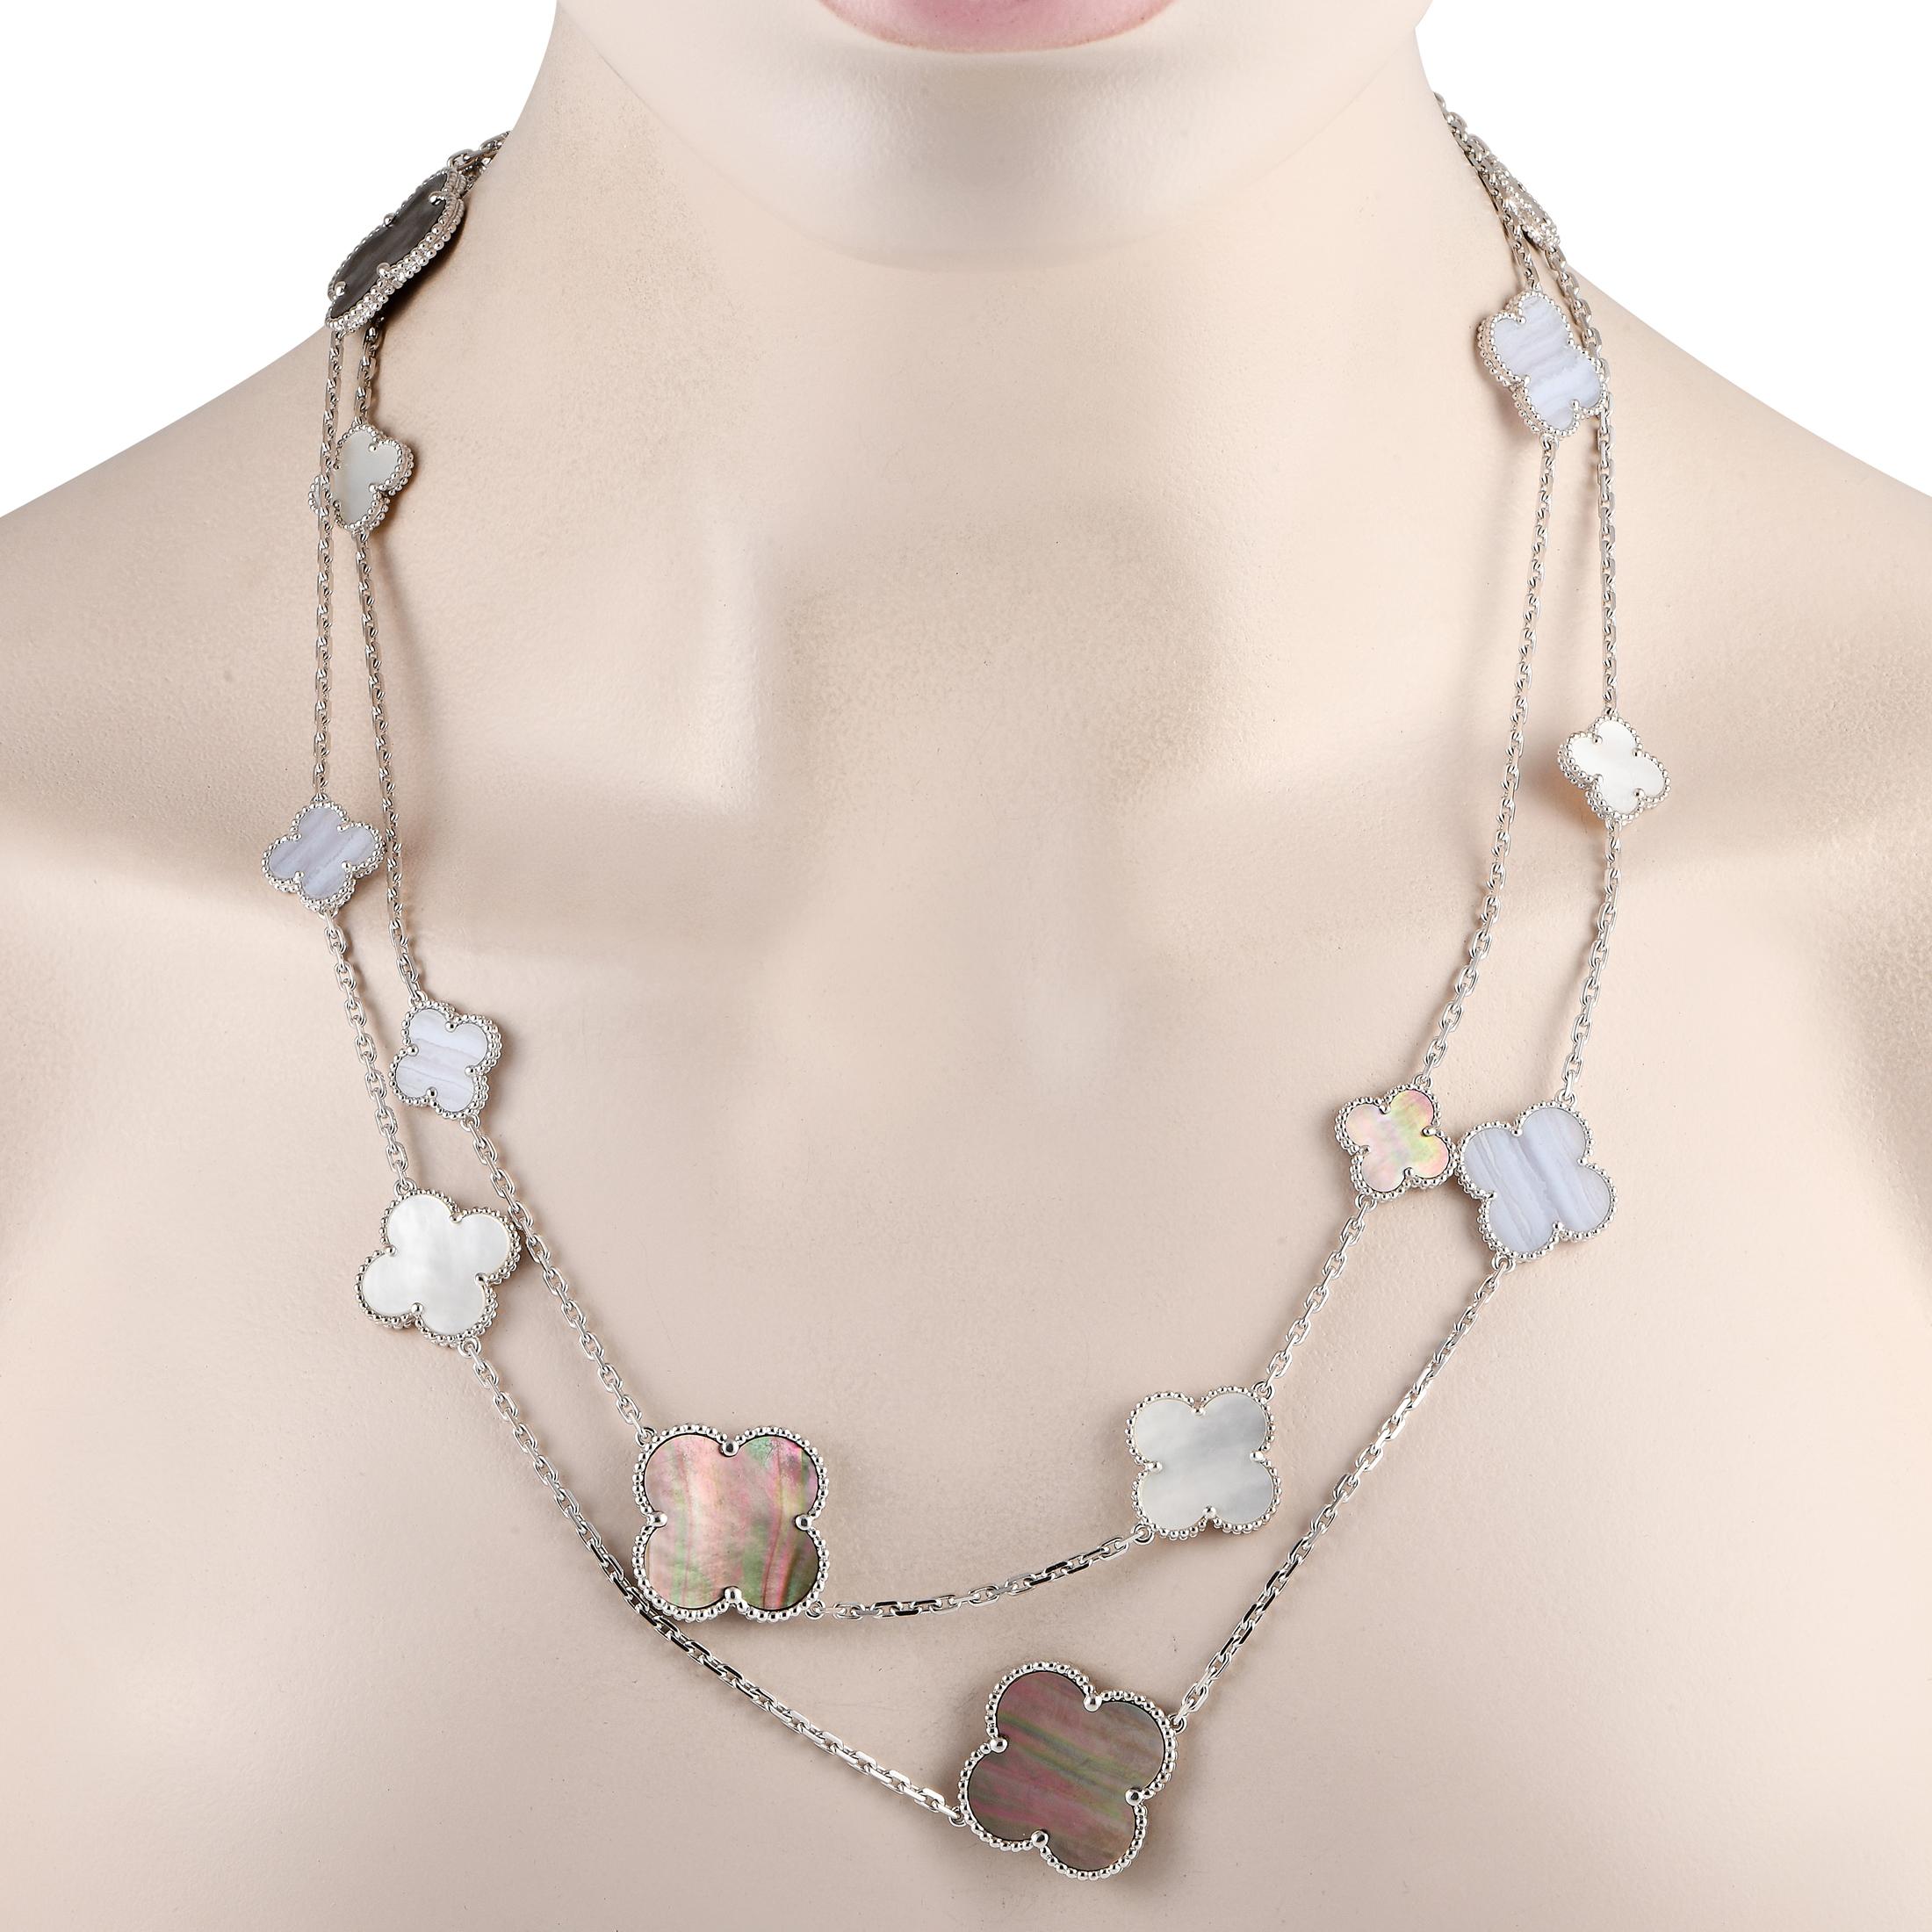 Make a statement by adding this impressive Van Cleef & Arpels Magic 16 Motif Necklace to any ensemble. The dramatic design is elevated by the brands iconic clover motif in a combination of Mother of Pearl and Chalcedony. Crafted from 18K White Gold,